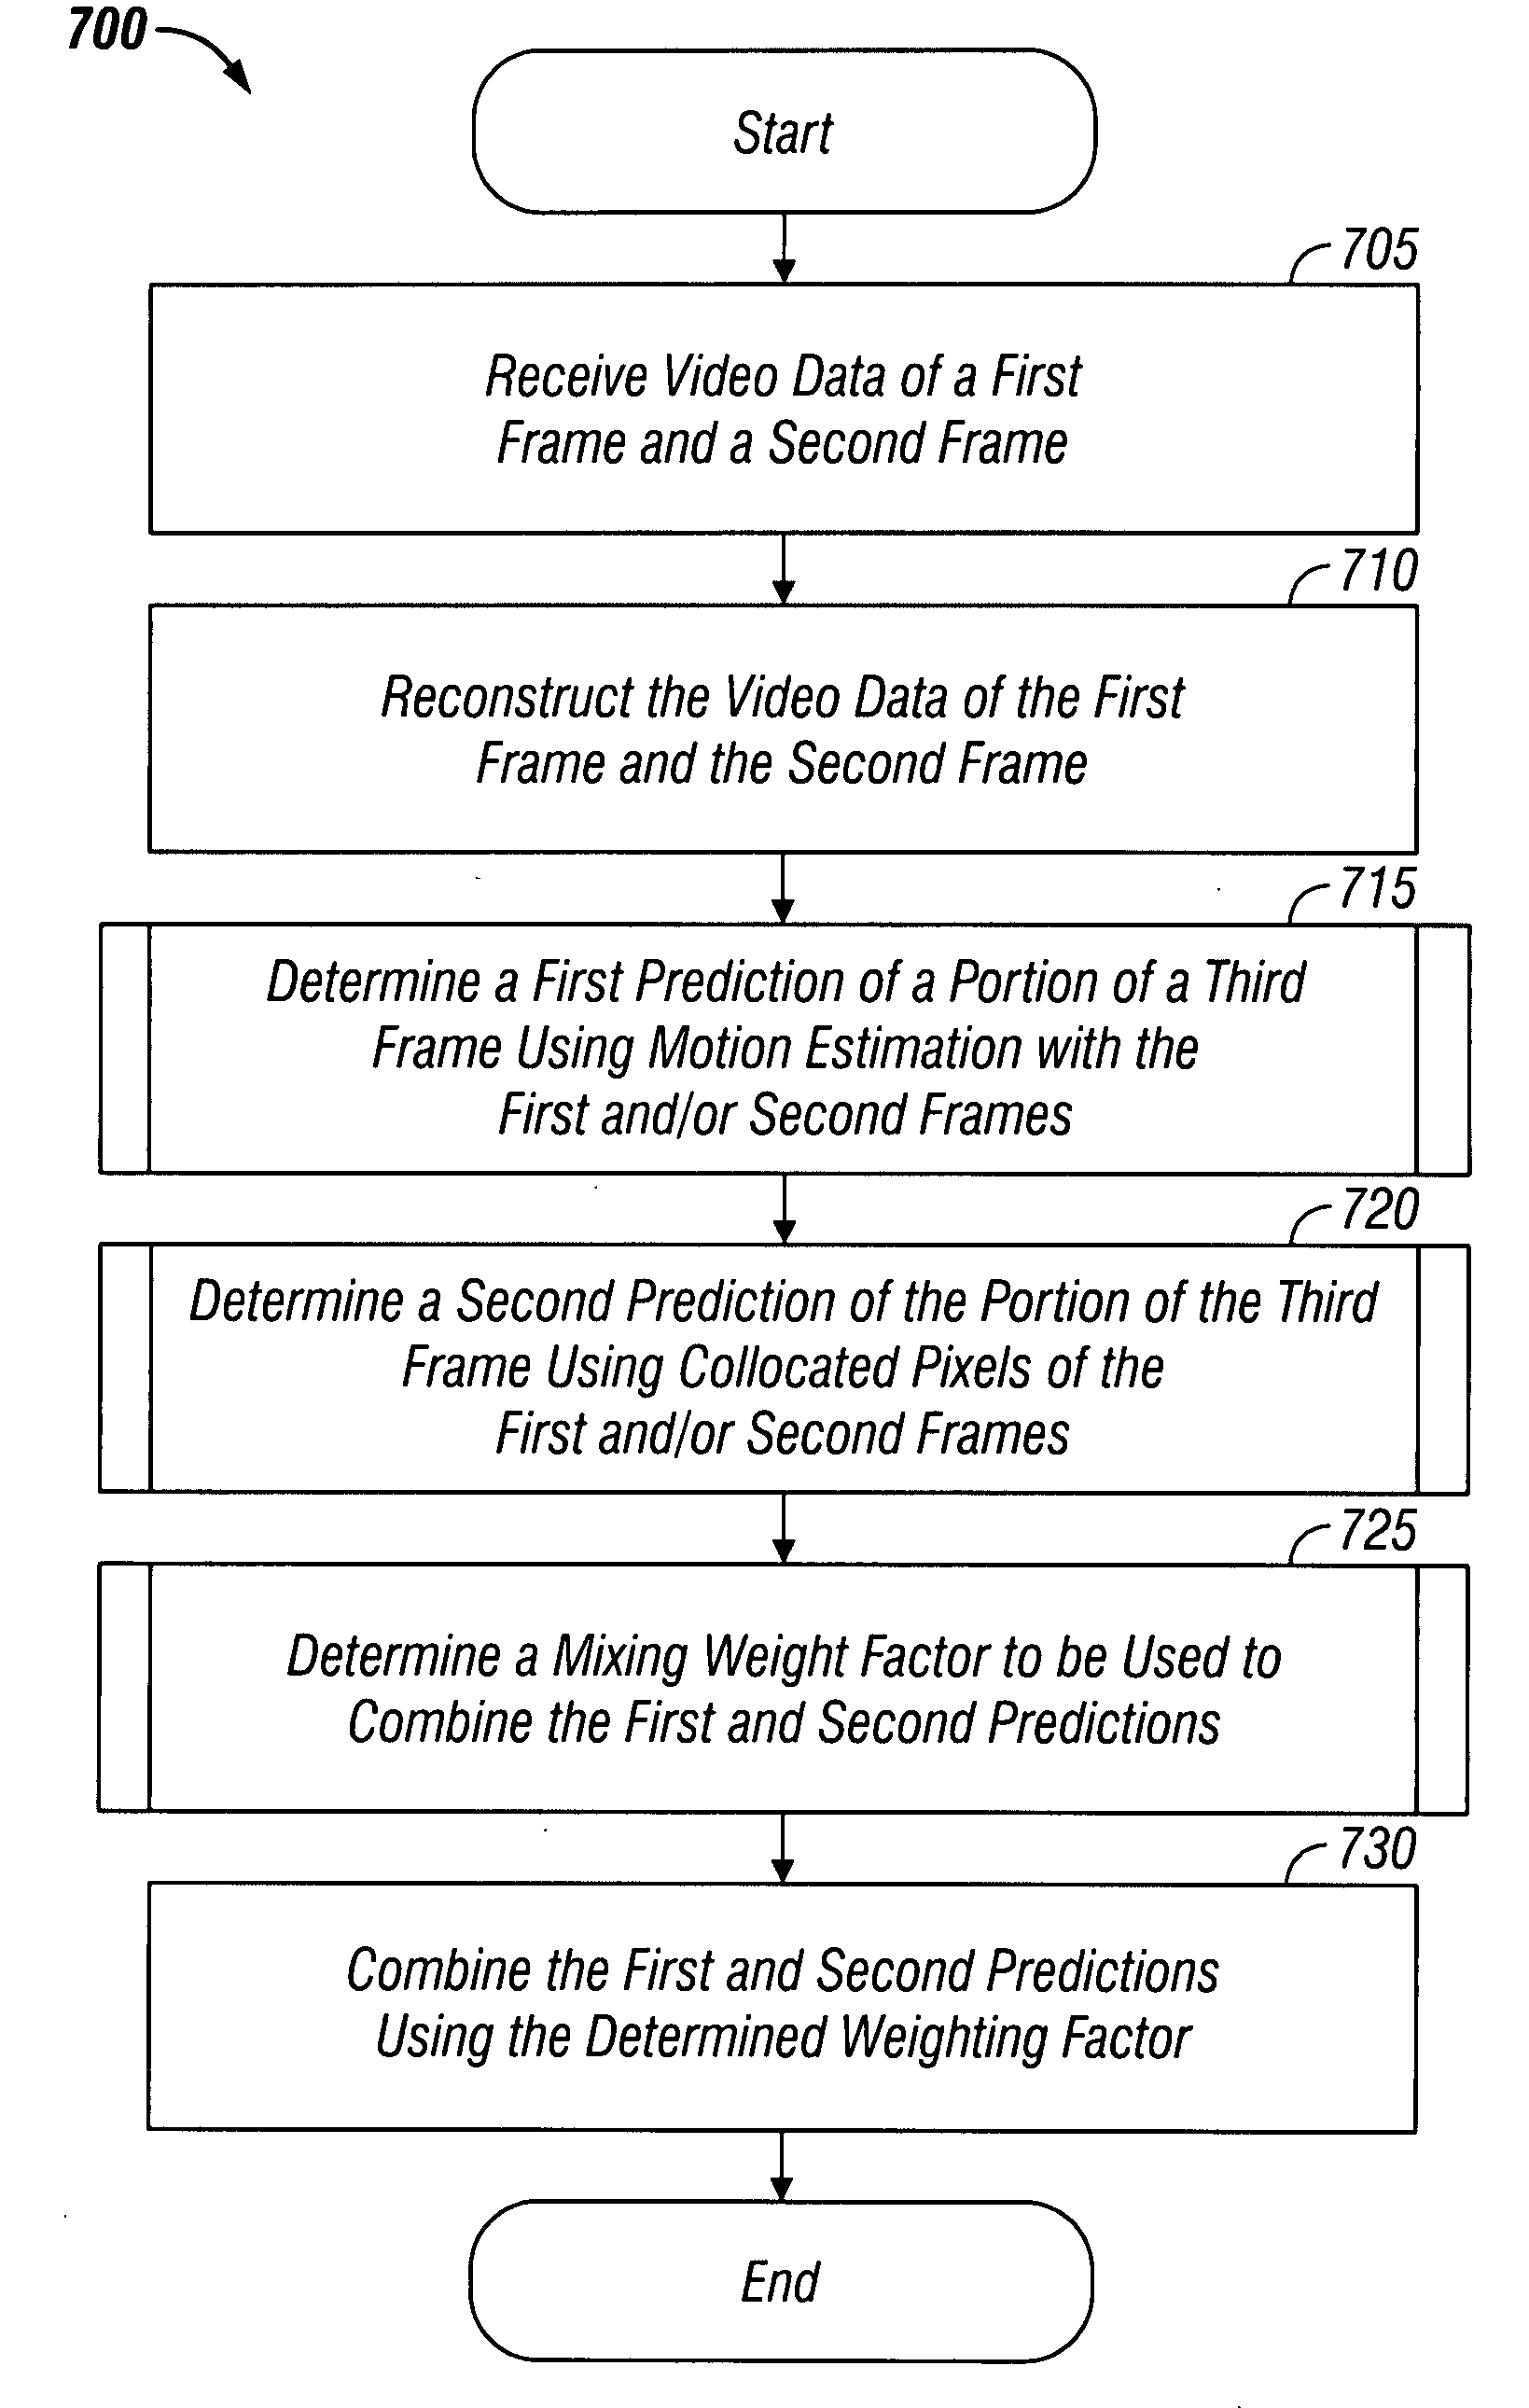 System and method for introducing virtual zero motion vector candidates in areas of a video sequence involving overlays